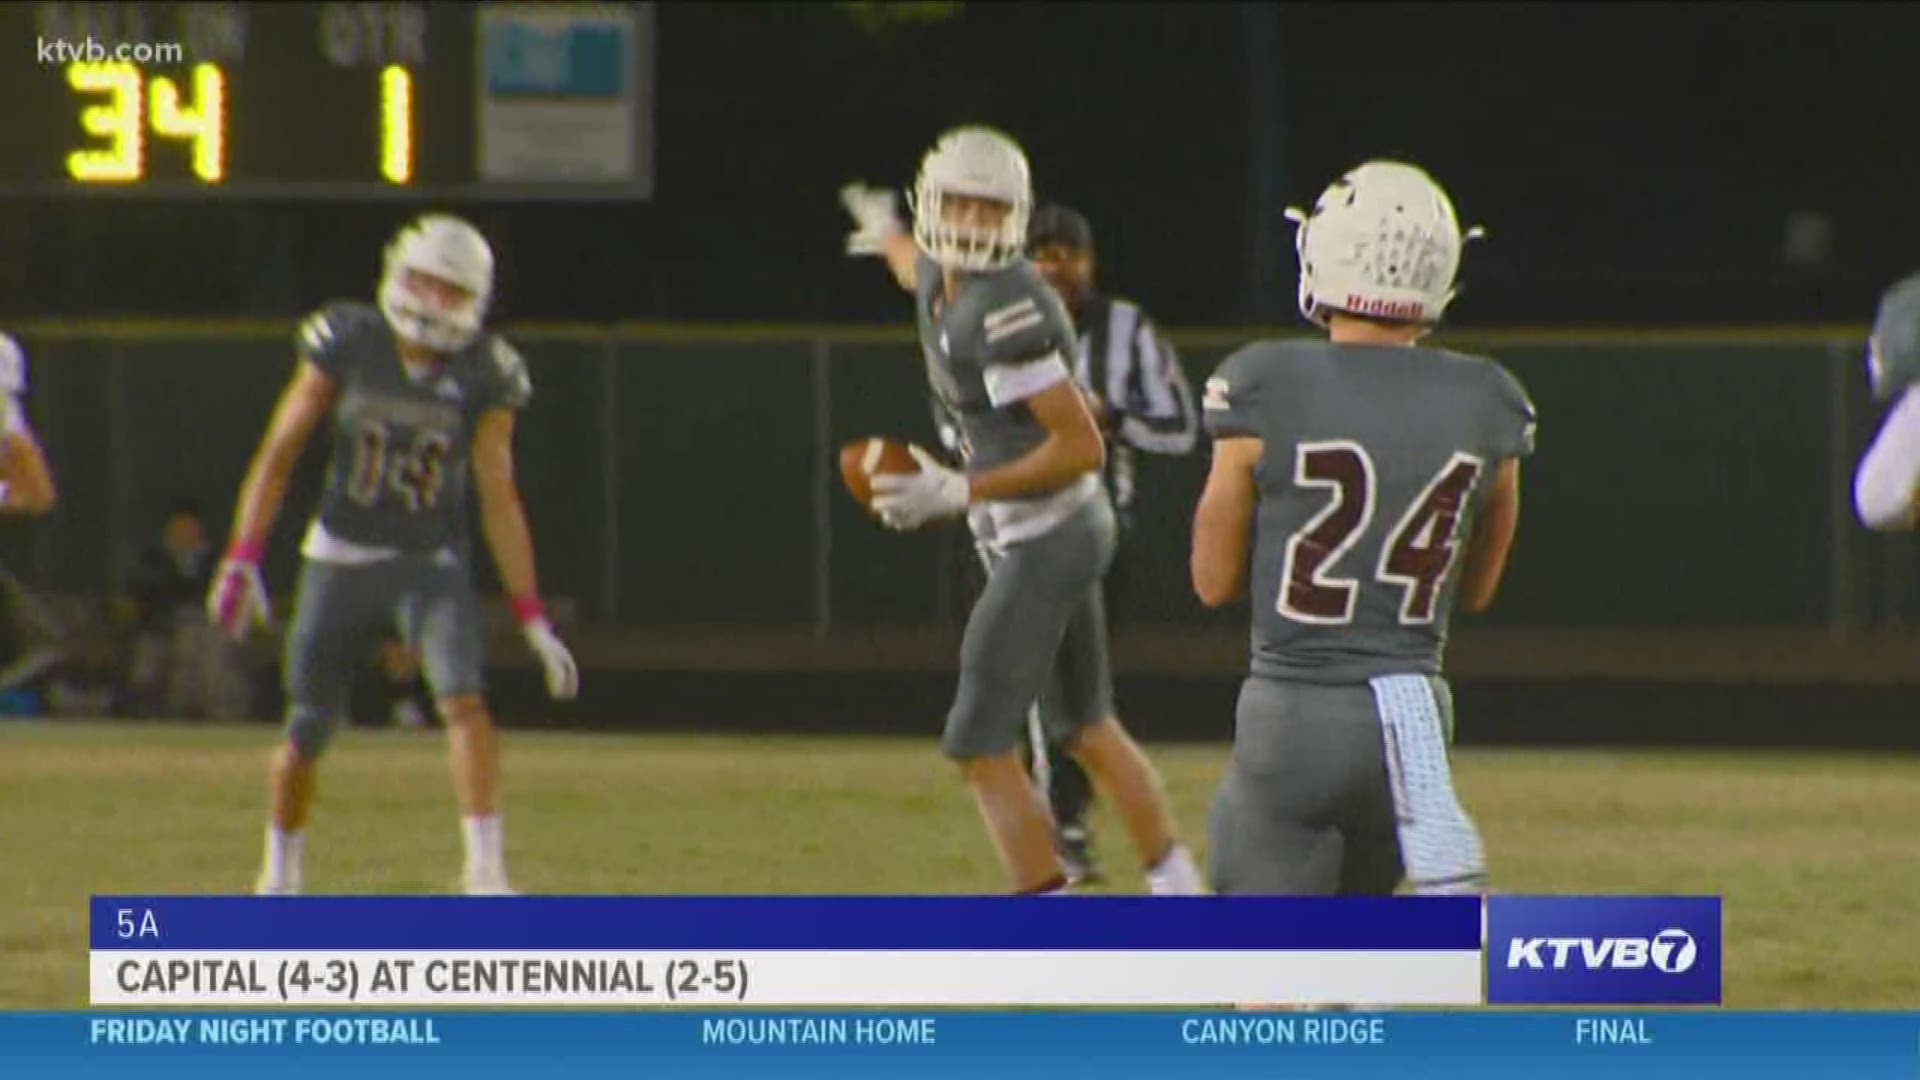 The Eagles left little doubt on who would win in this SIC matchup. Capital wins 50-27 over Centennial.